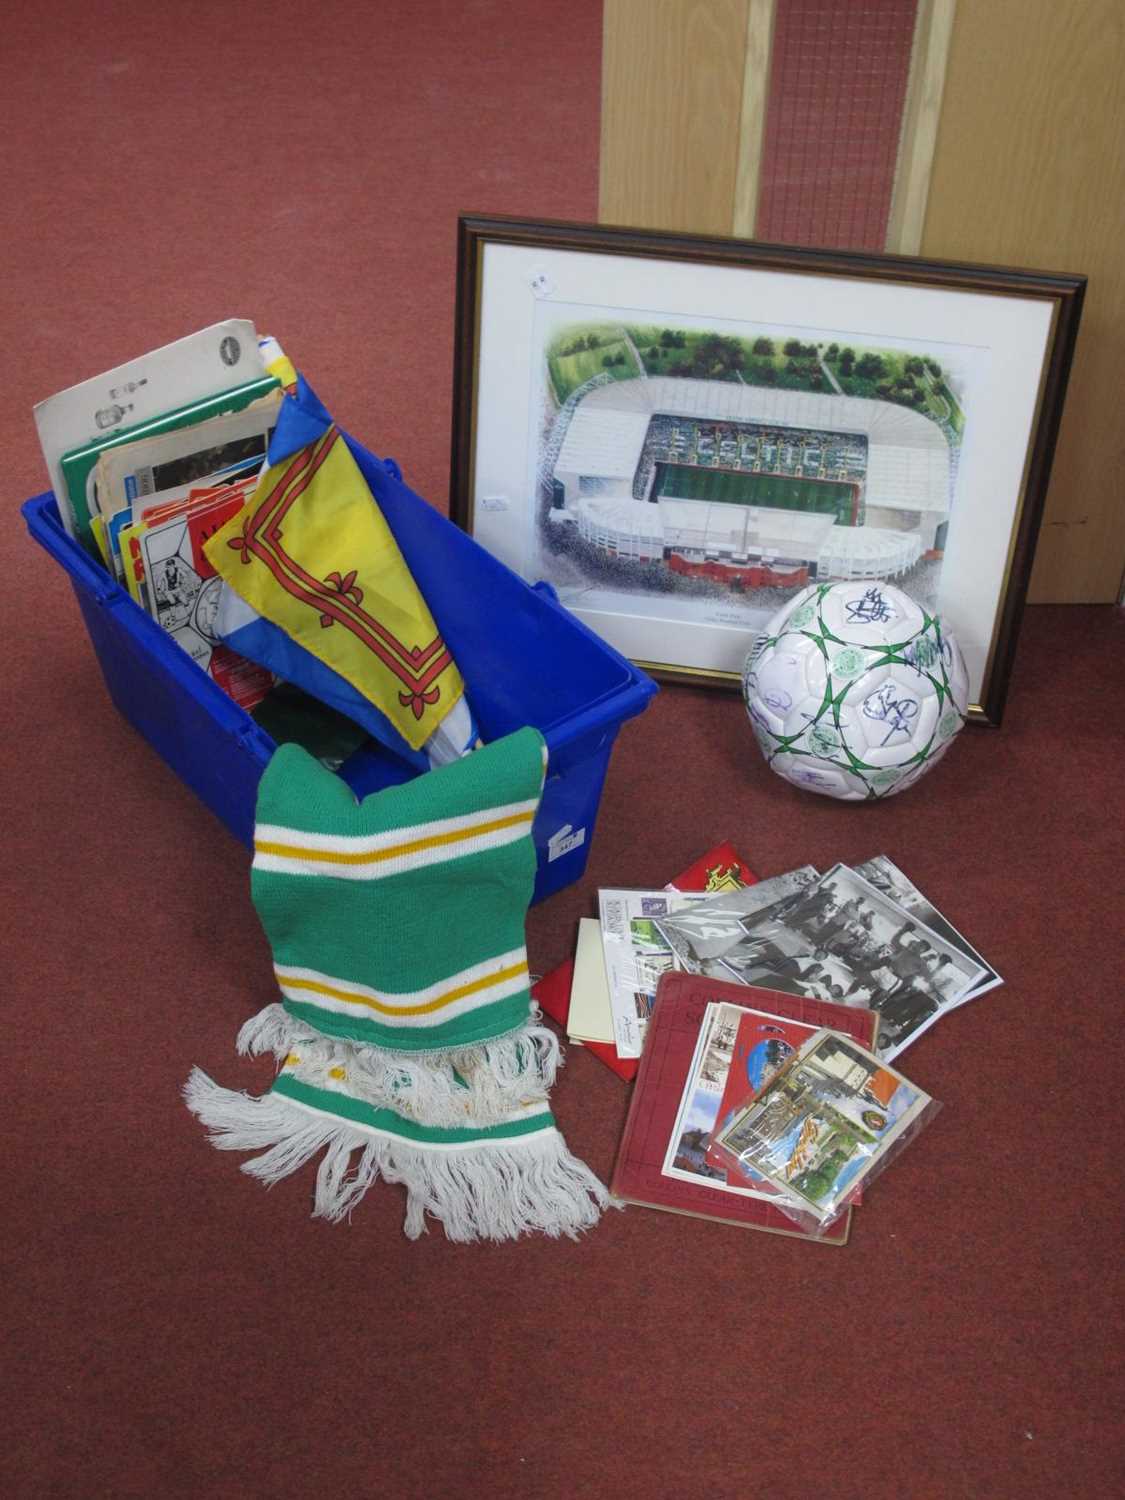 Glasgow Celtic, signed print of Celtic Park, signed ball, scarf, The Jock Stein years package. 82-